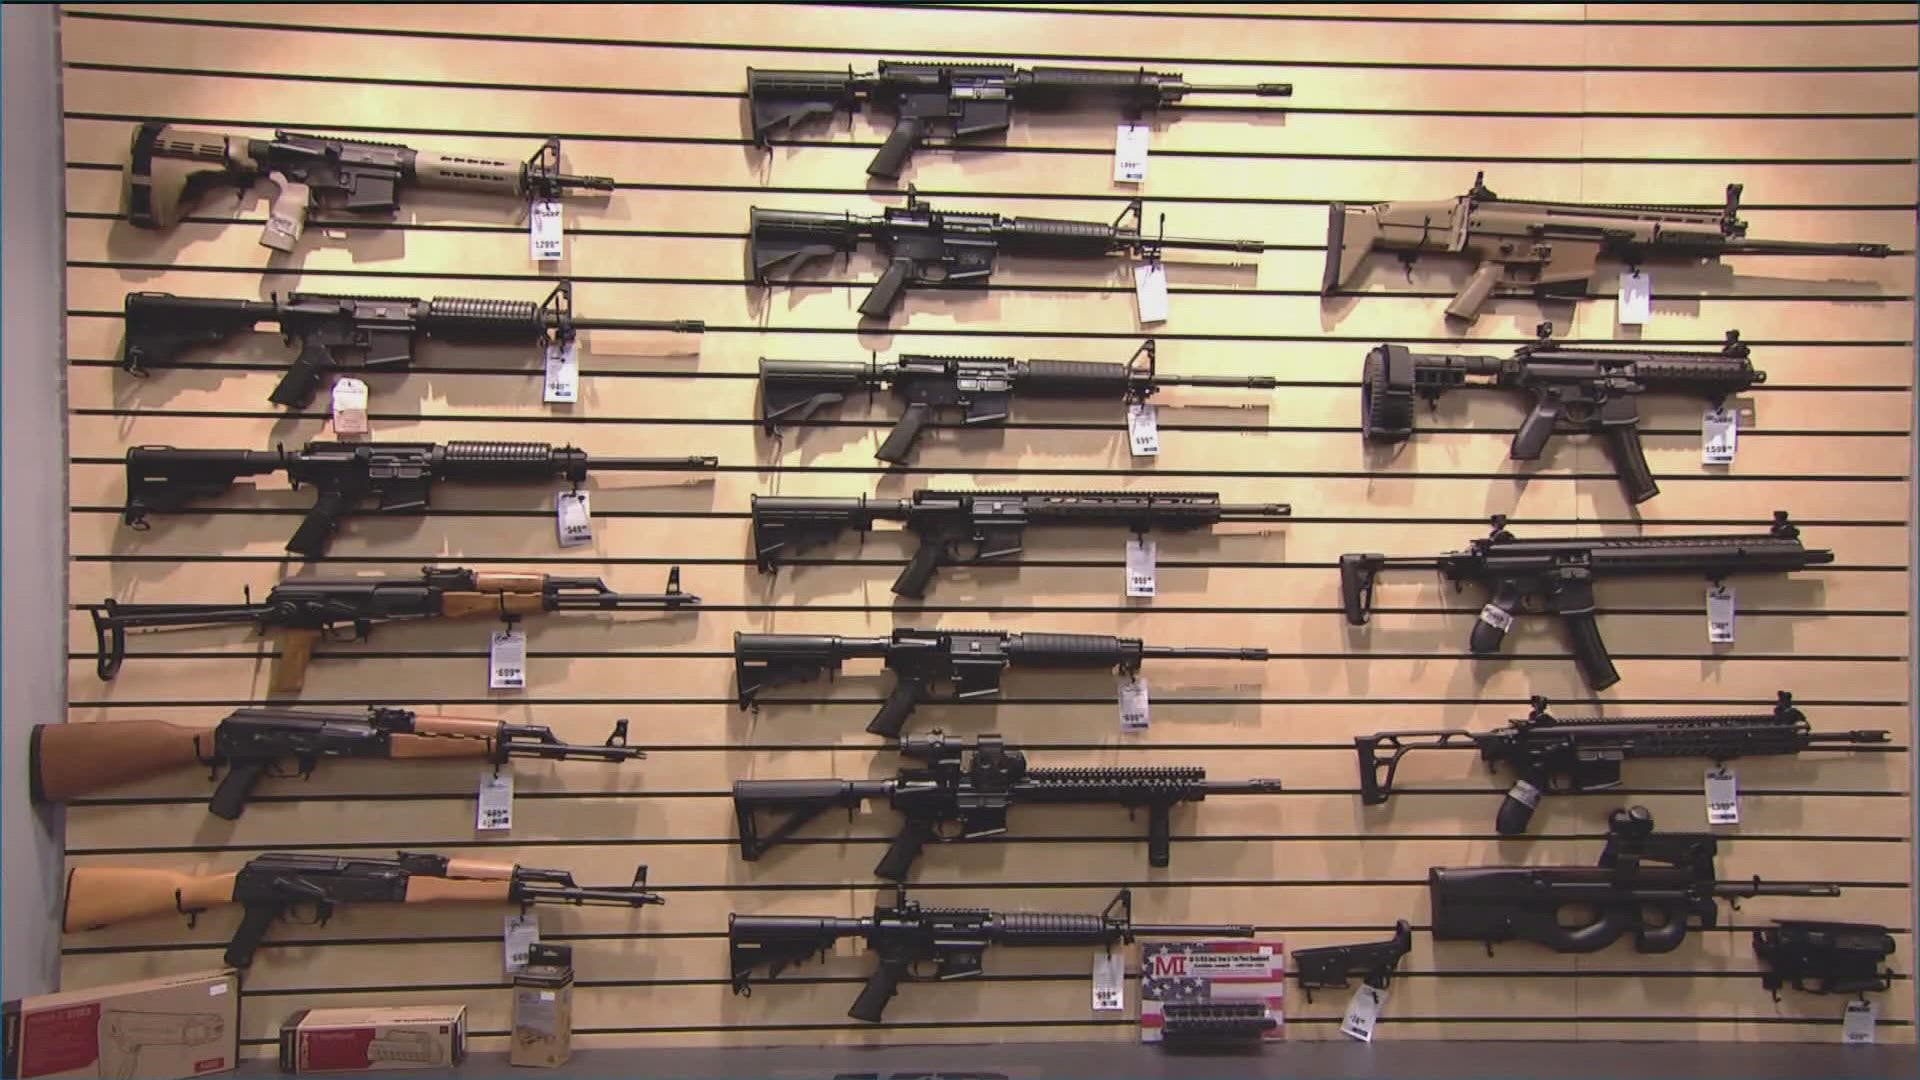 A federal judge says he will block part of a new California law that critics say was designed to make it nearly impossible to challenge the gun laws in court.